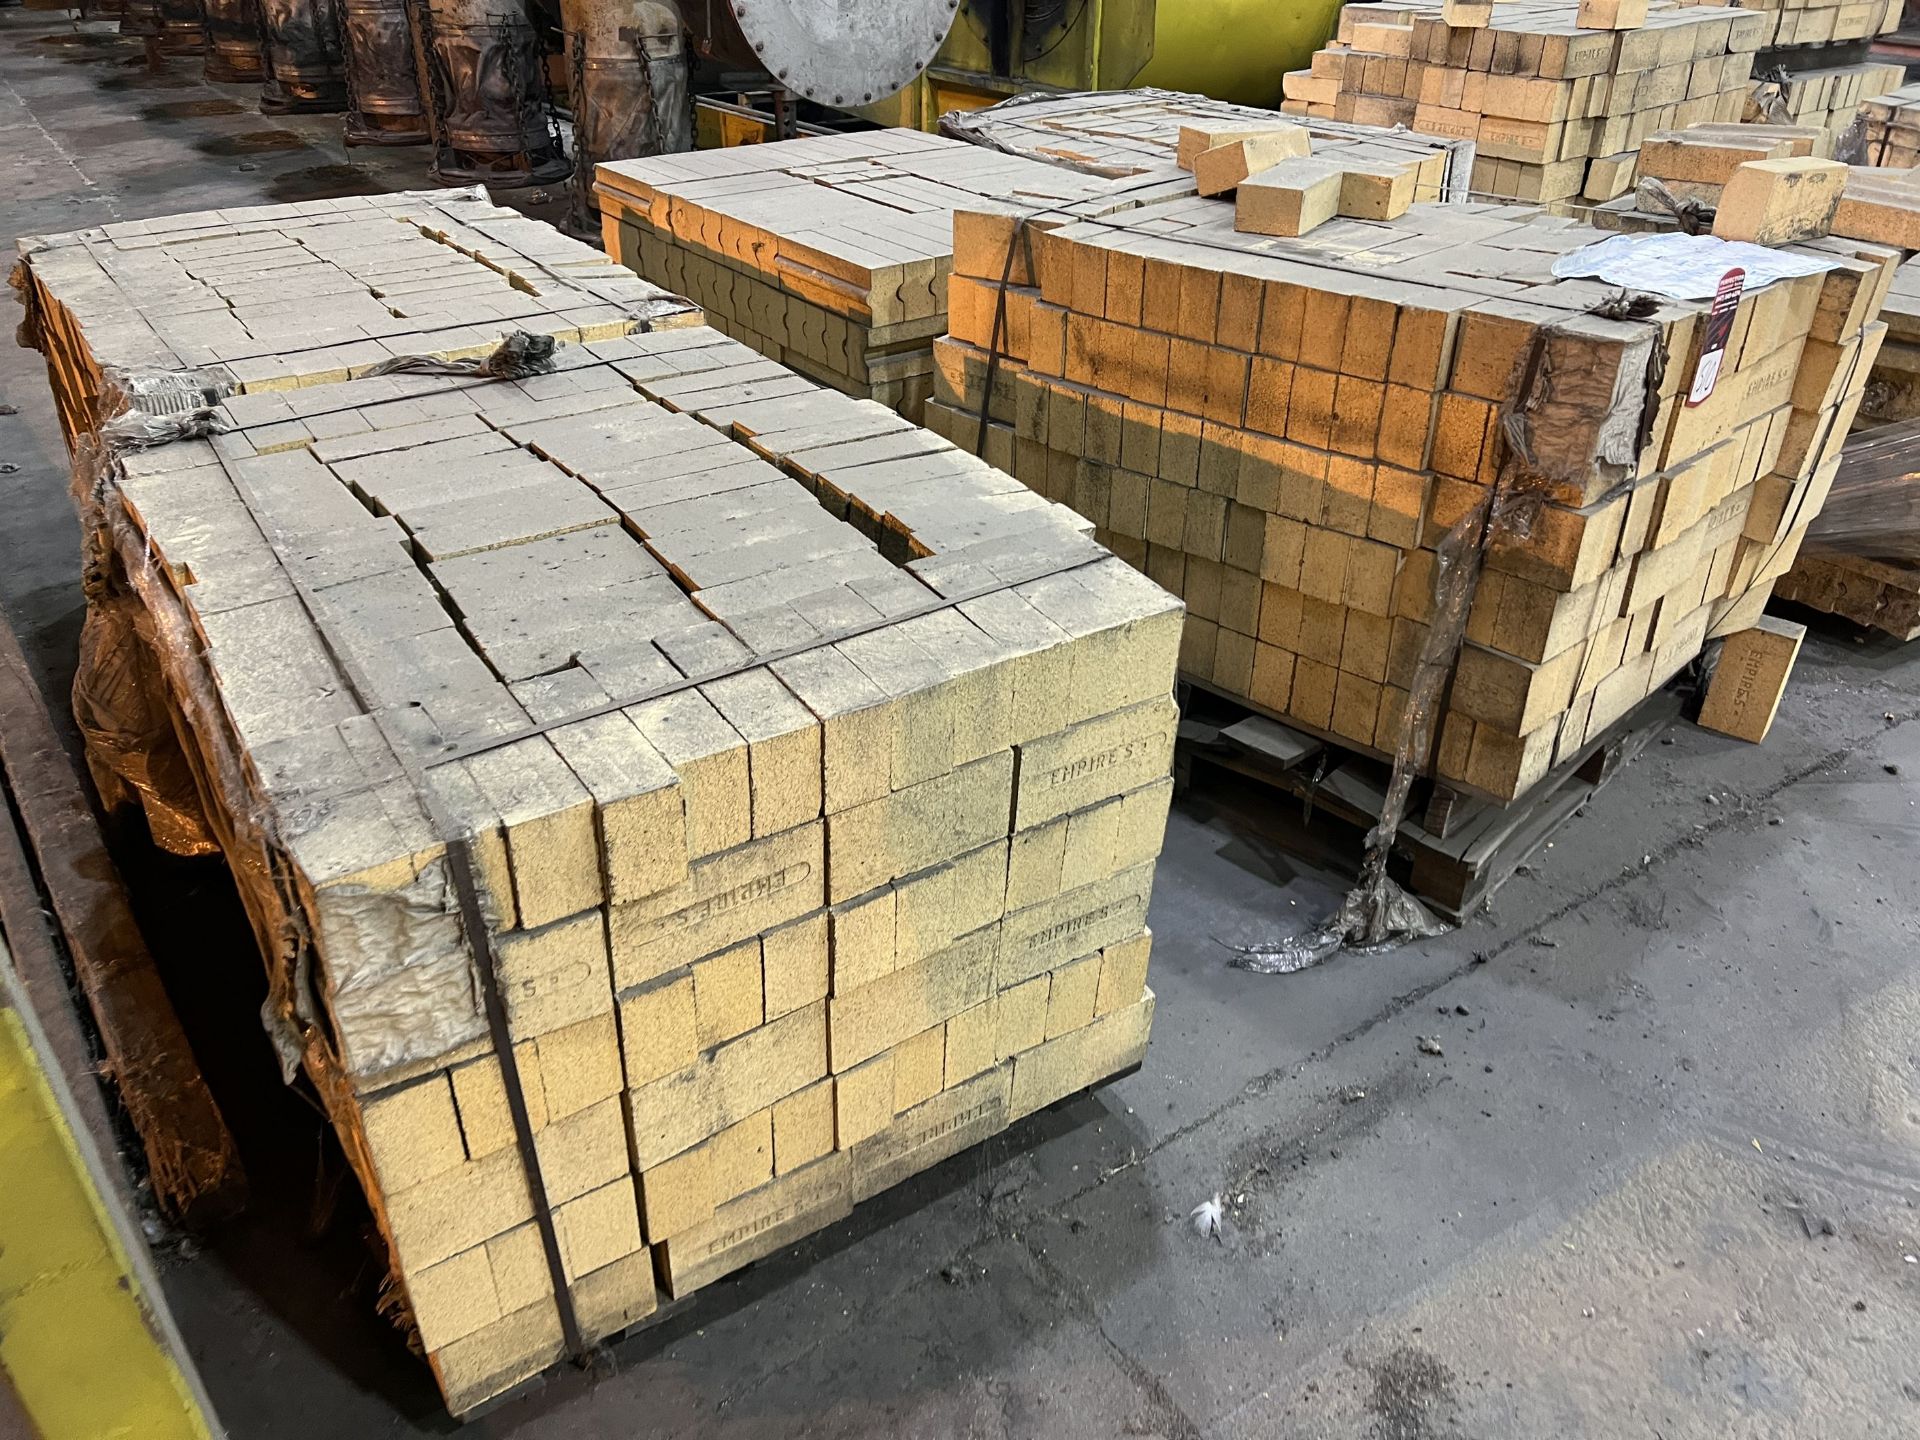 Lot of (9) Pallets of EMPIRE S Carbon Baking Straight Brick, 9" x 4.5" x 3" Bricks - Image 2 of 5